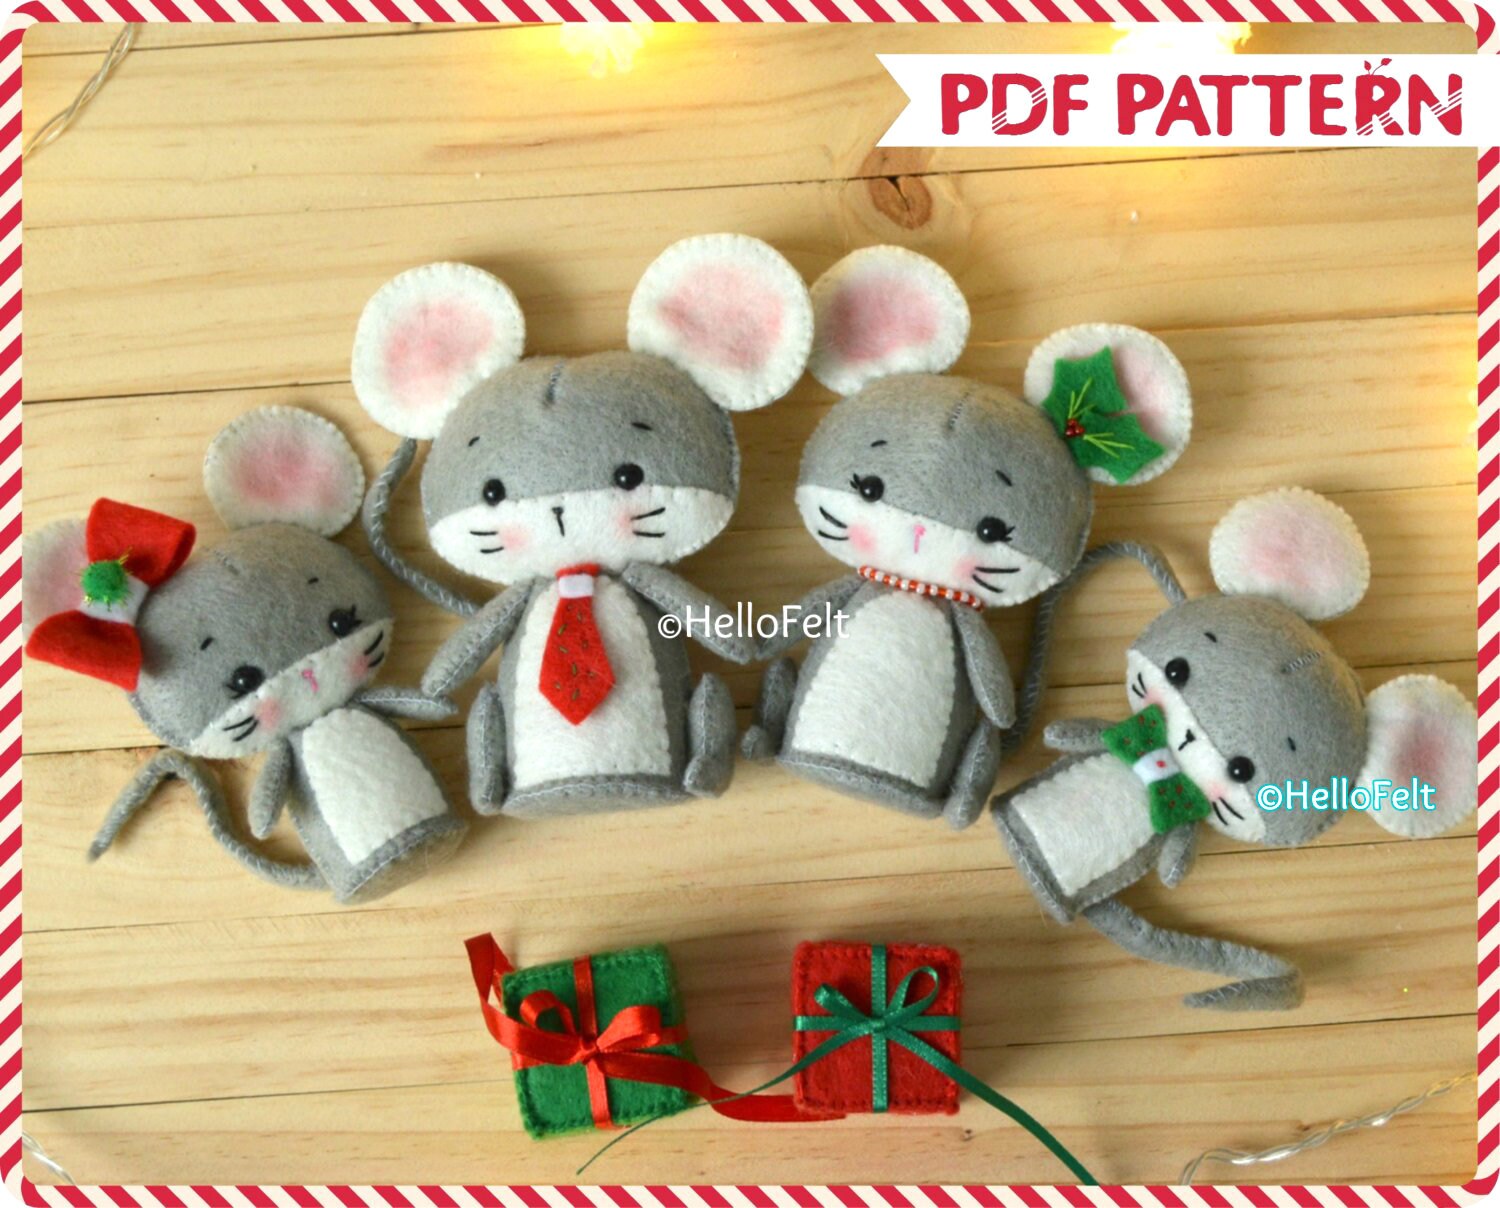 iThinksew - Patterns and More - Puppets theatre PDF sewing pattern.  Christmas patterns. Toys patterns. Patterns for kids. Kids patterns PDF.